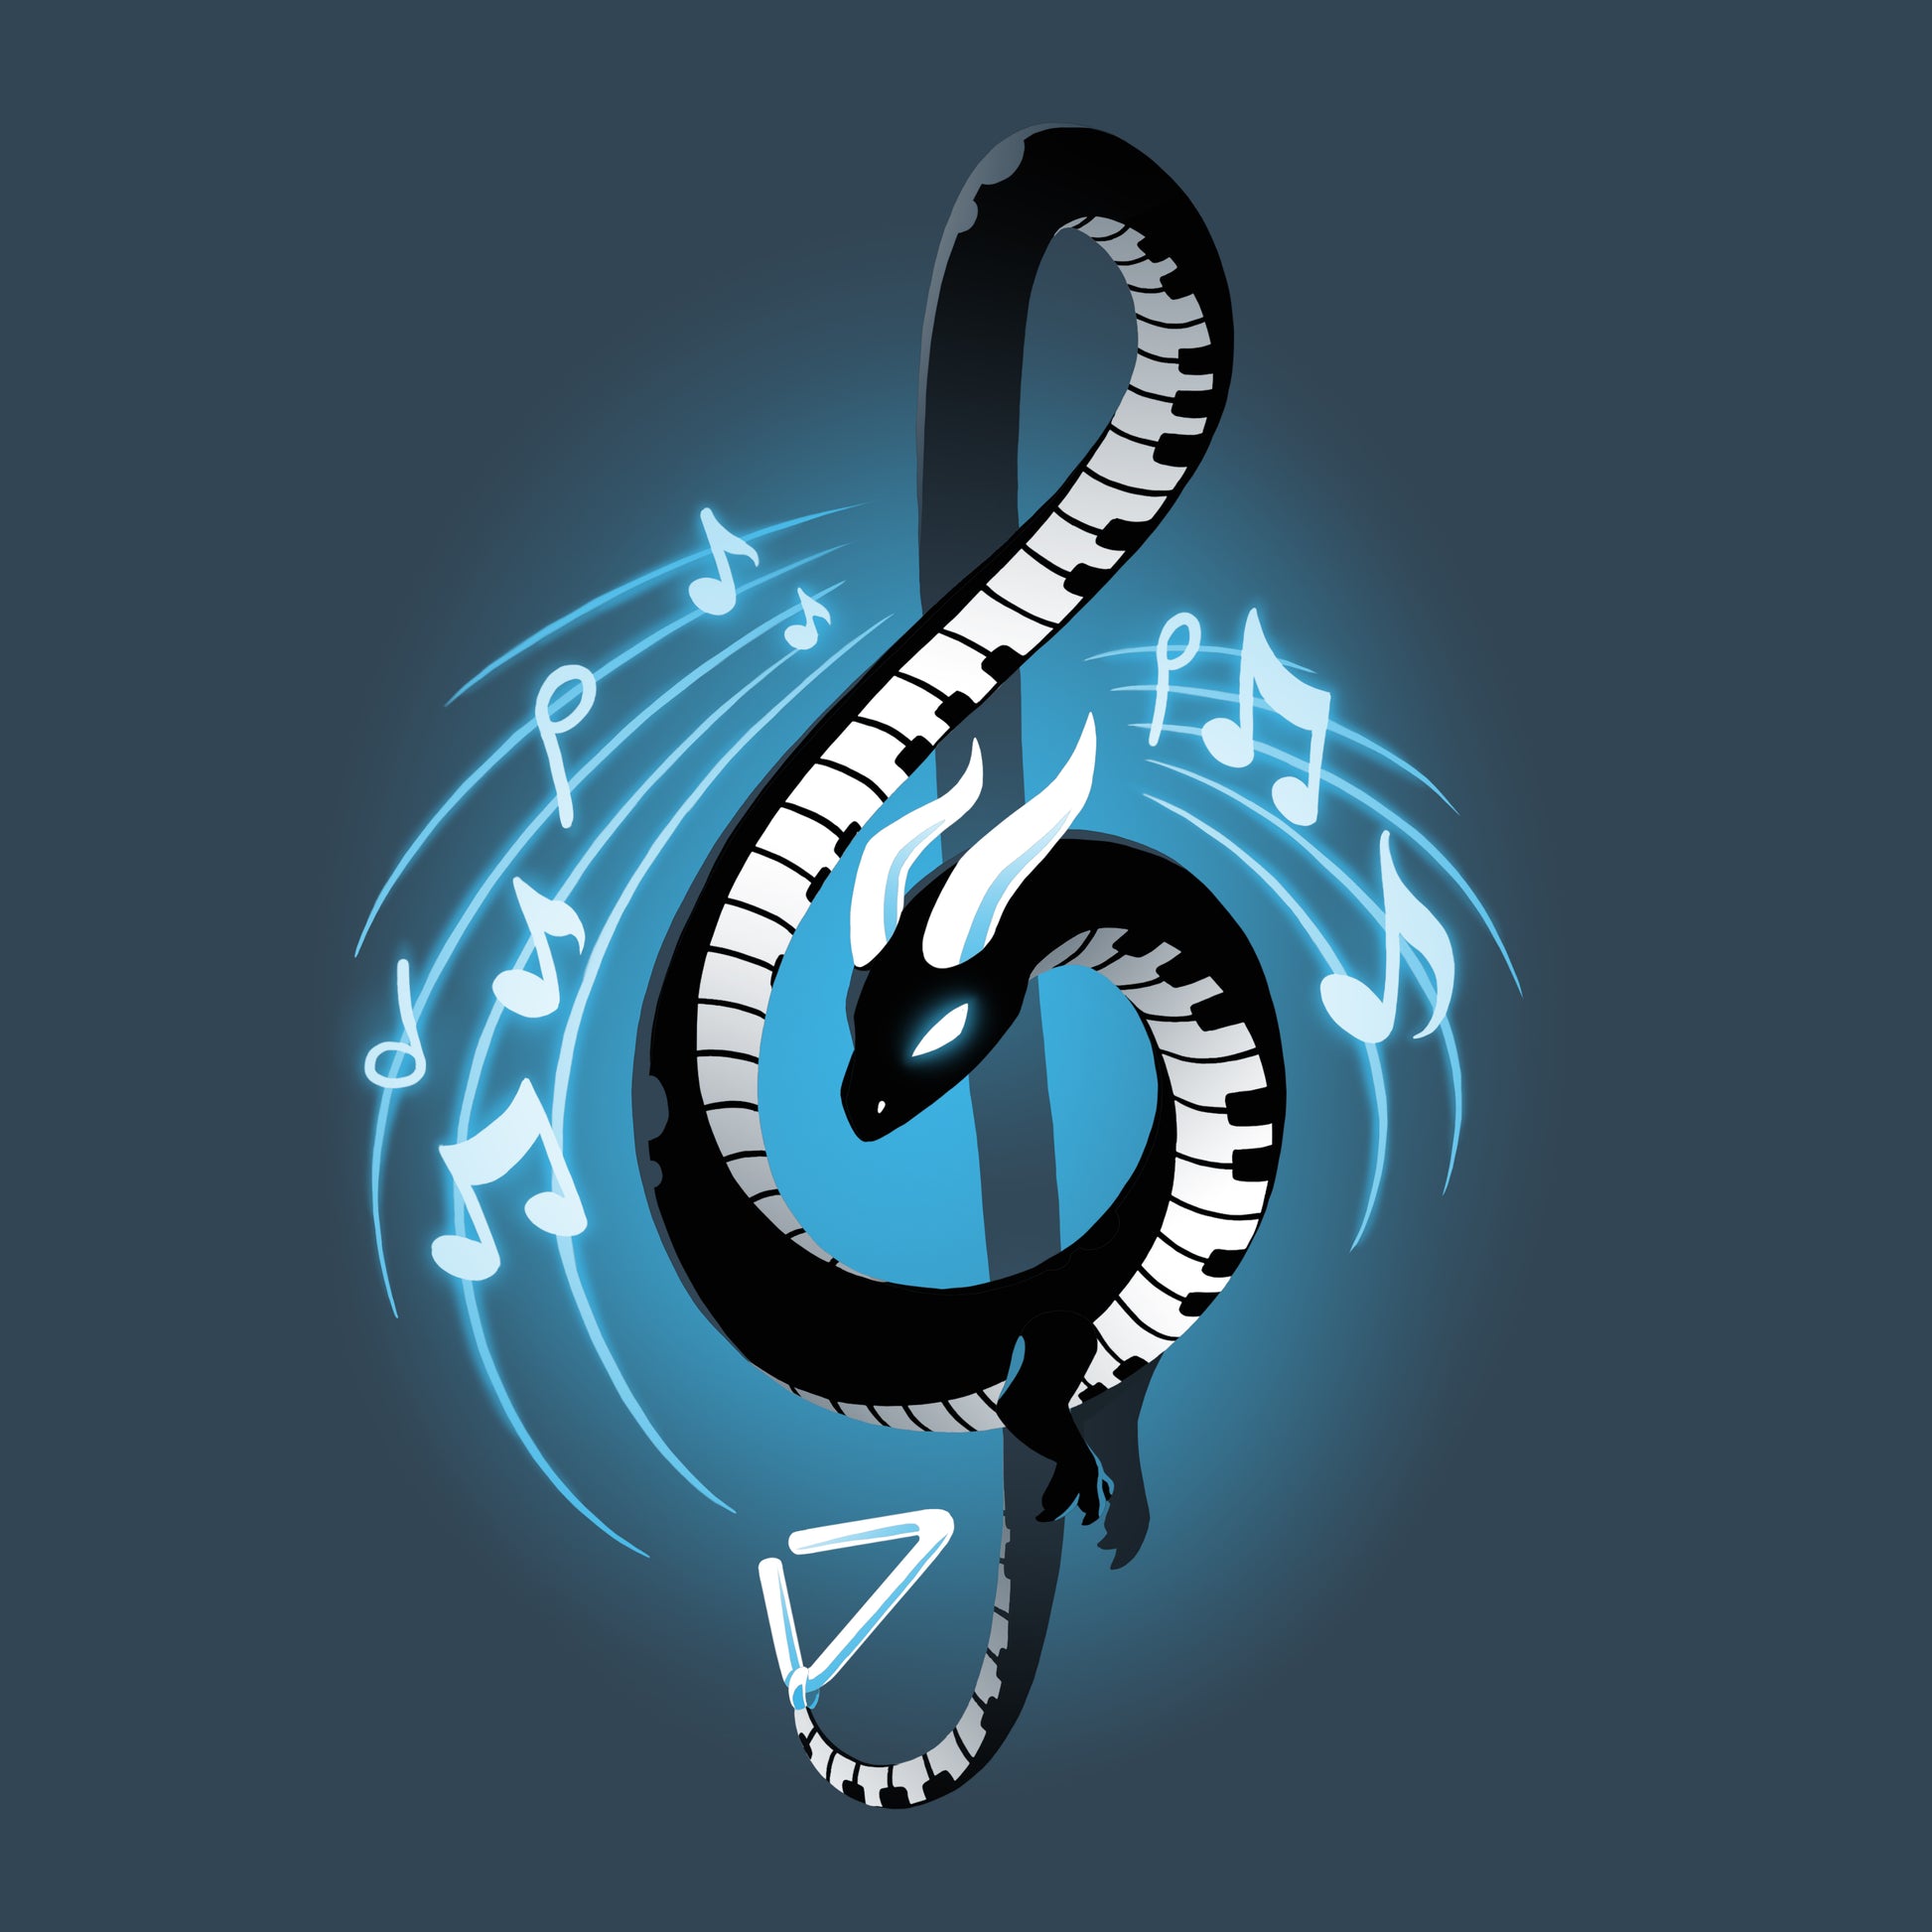 An image of a Musical Dragon, created by TeeTurtle.